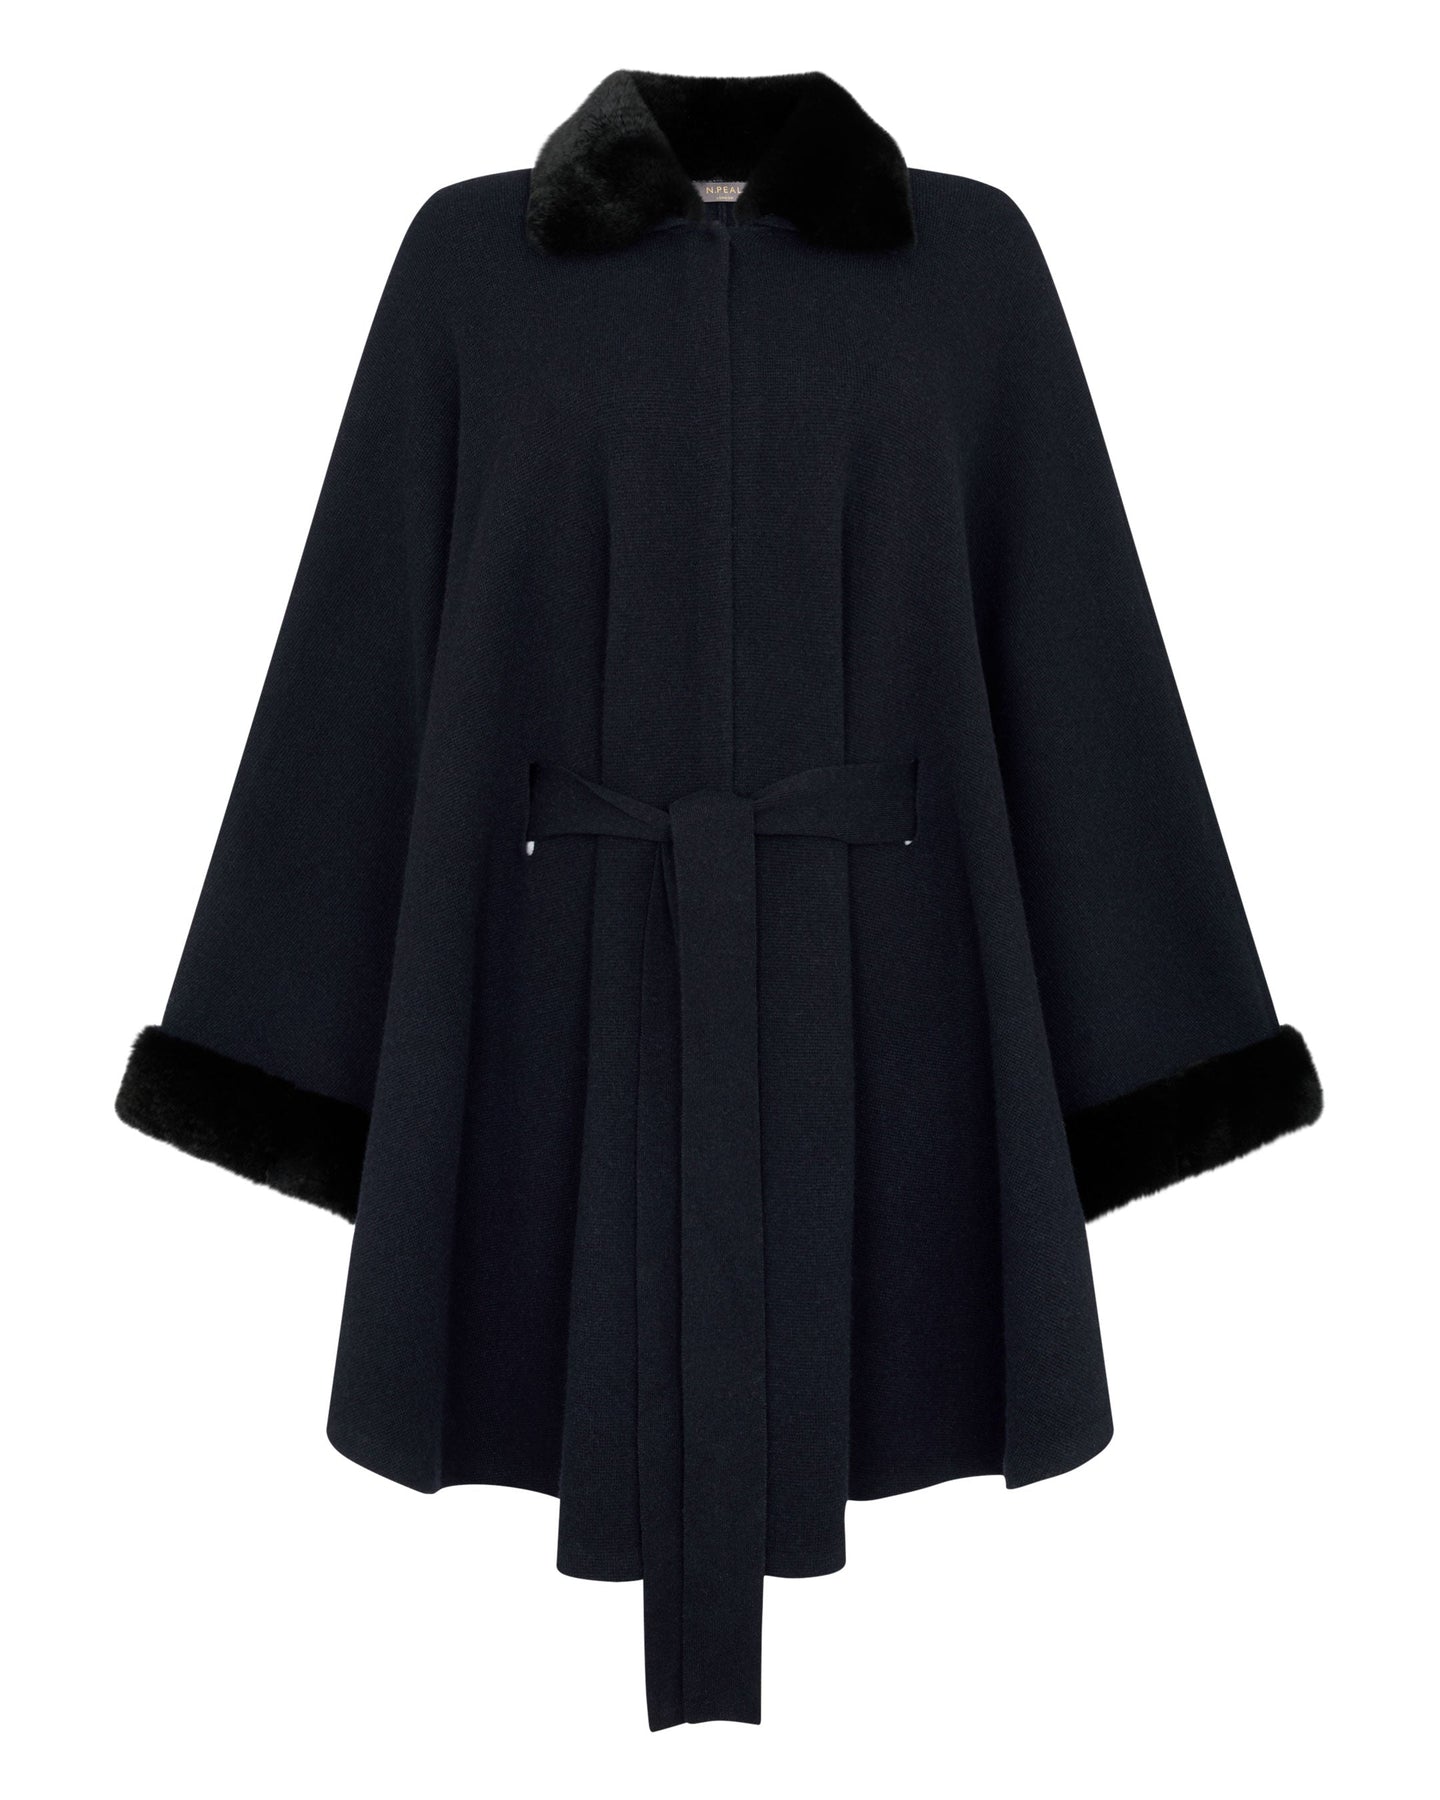 N.Peal Women's Rex Trim Belted Cashmere Cape Navy Blue